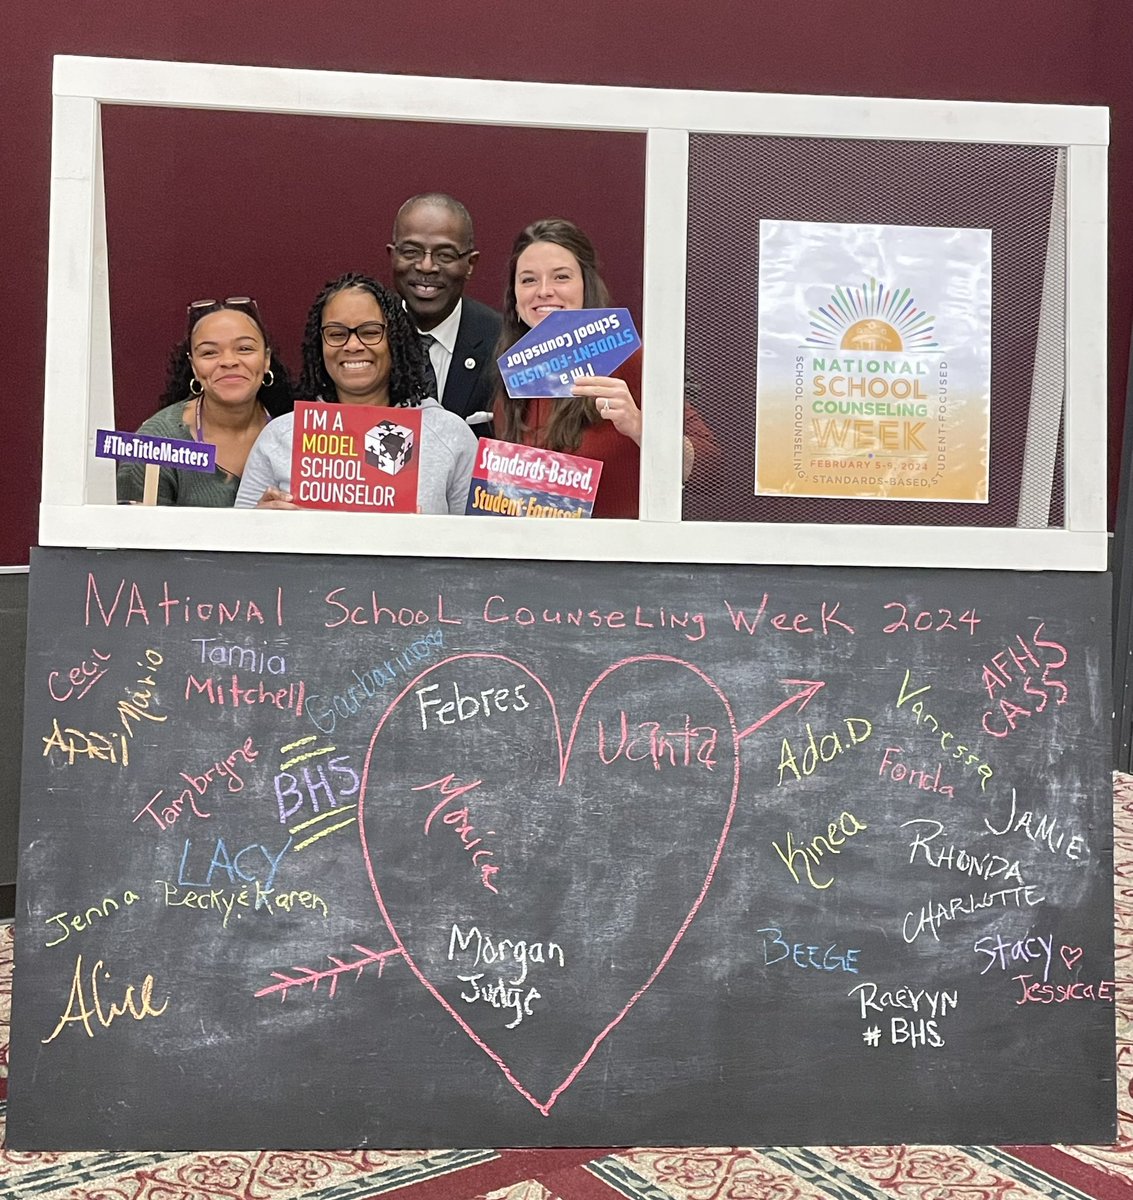 Thank you, Dr. Taylor, for supporting and celebrating School Counselors during #NCSW2024. @WCPSS @WCPSSTeam @WCPSSProfLearn @ASCAtweets @ncpublicschools